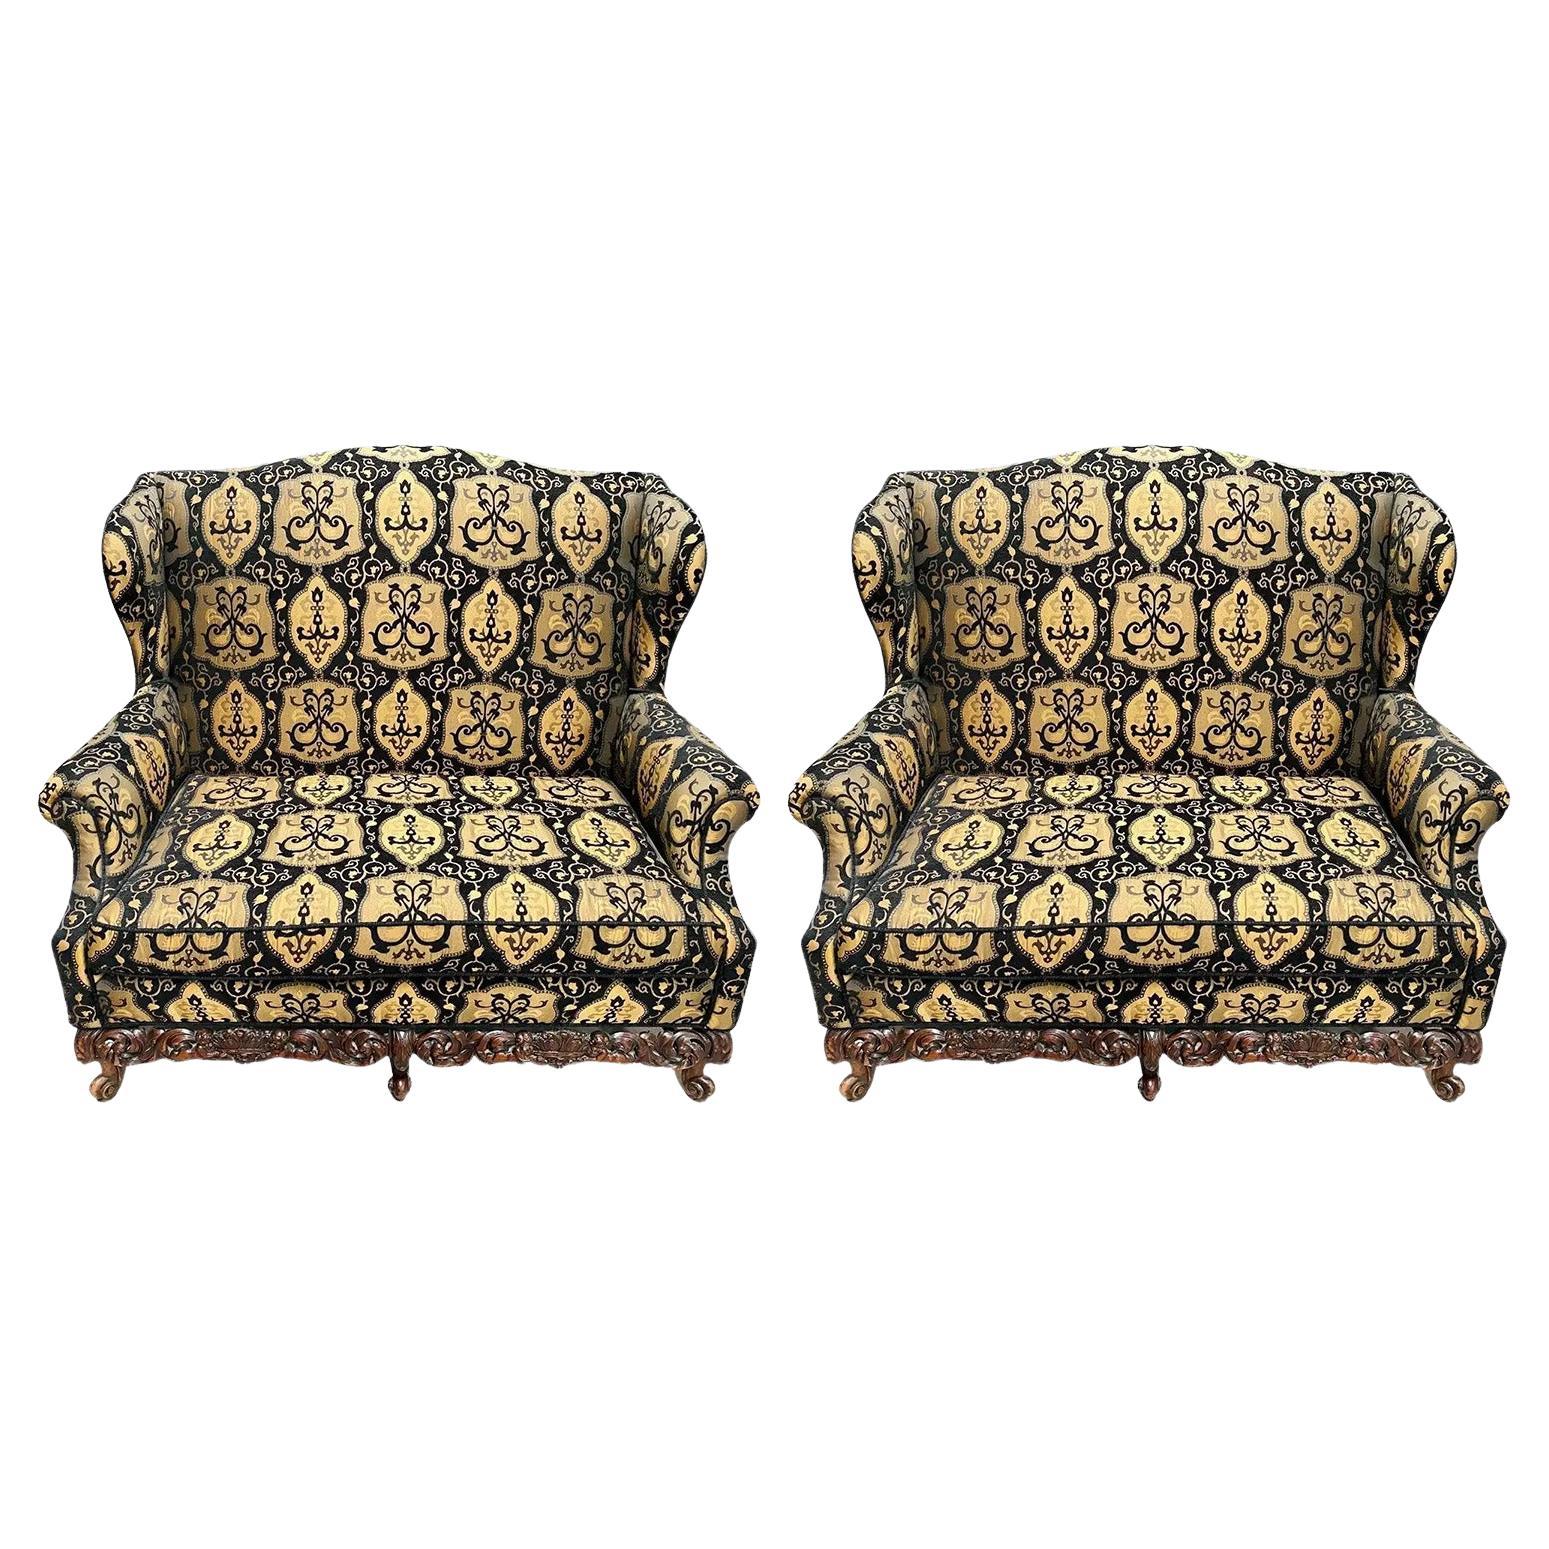 Rococo Style Settee, Sofa or Canape in Fine Black and Beige Upholstery, a Pair For Sale